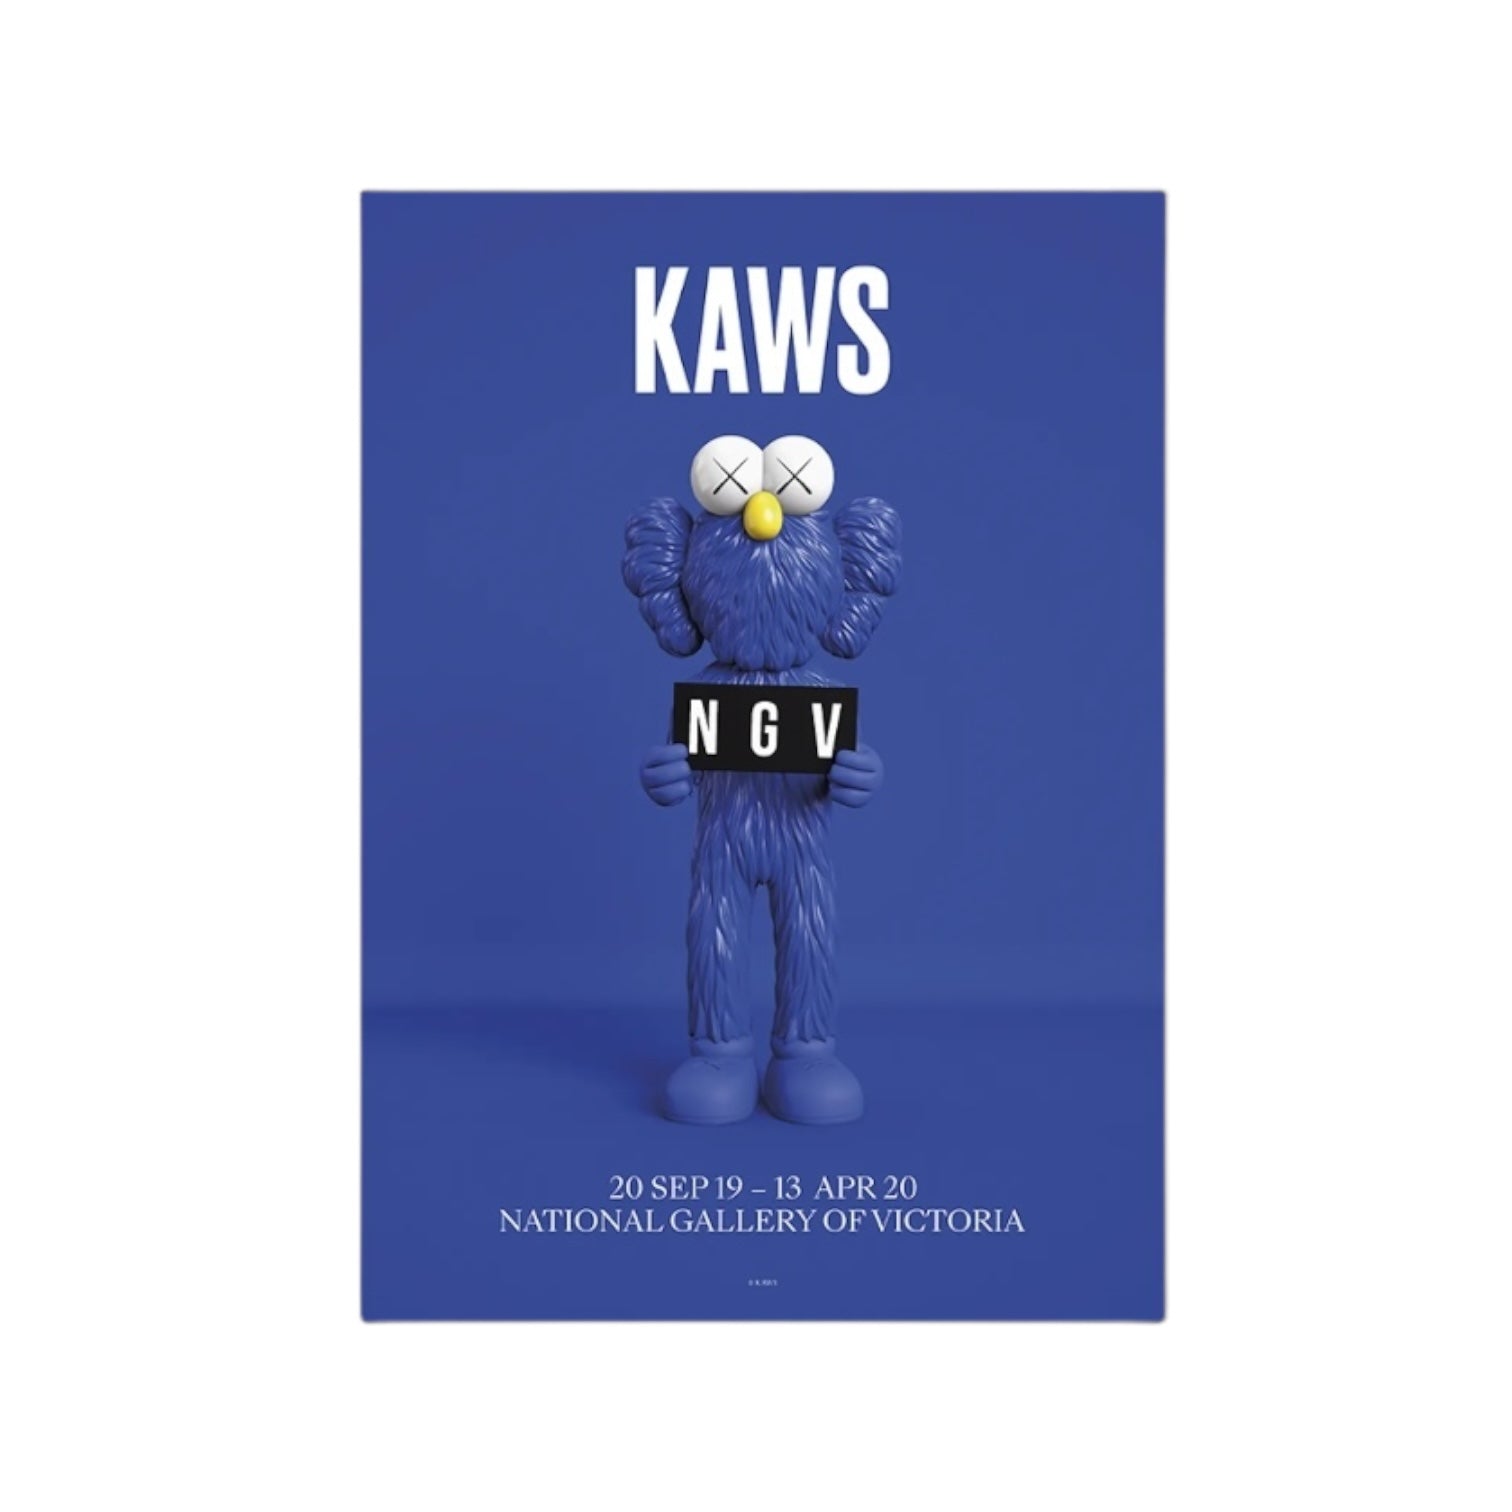 Kaws x NGV BFF Exhibition Poster Blue - Blue Art Poster